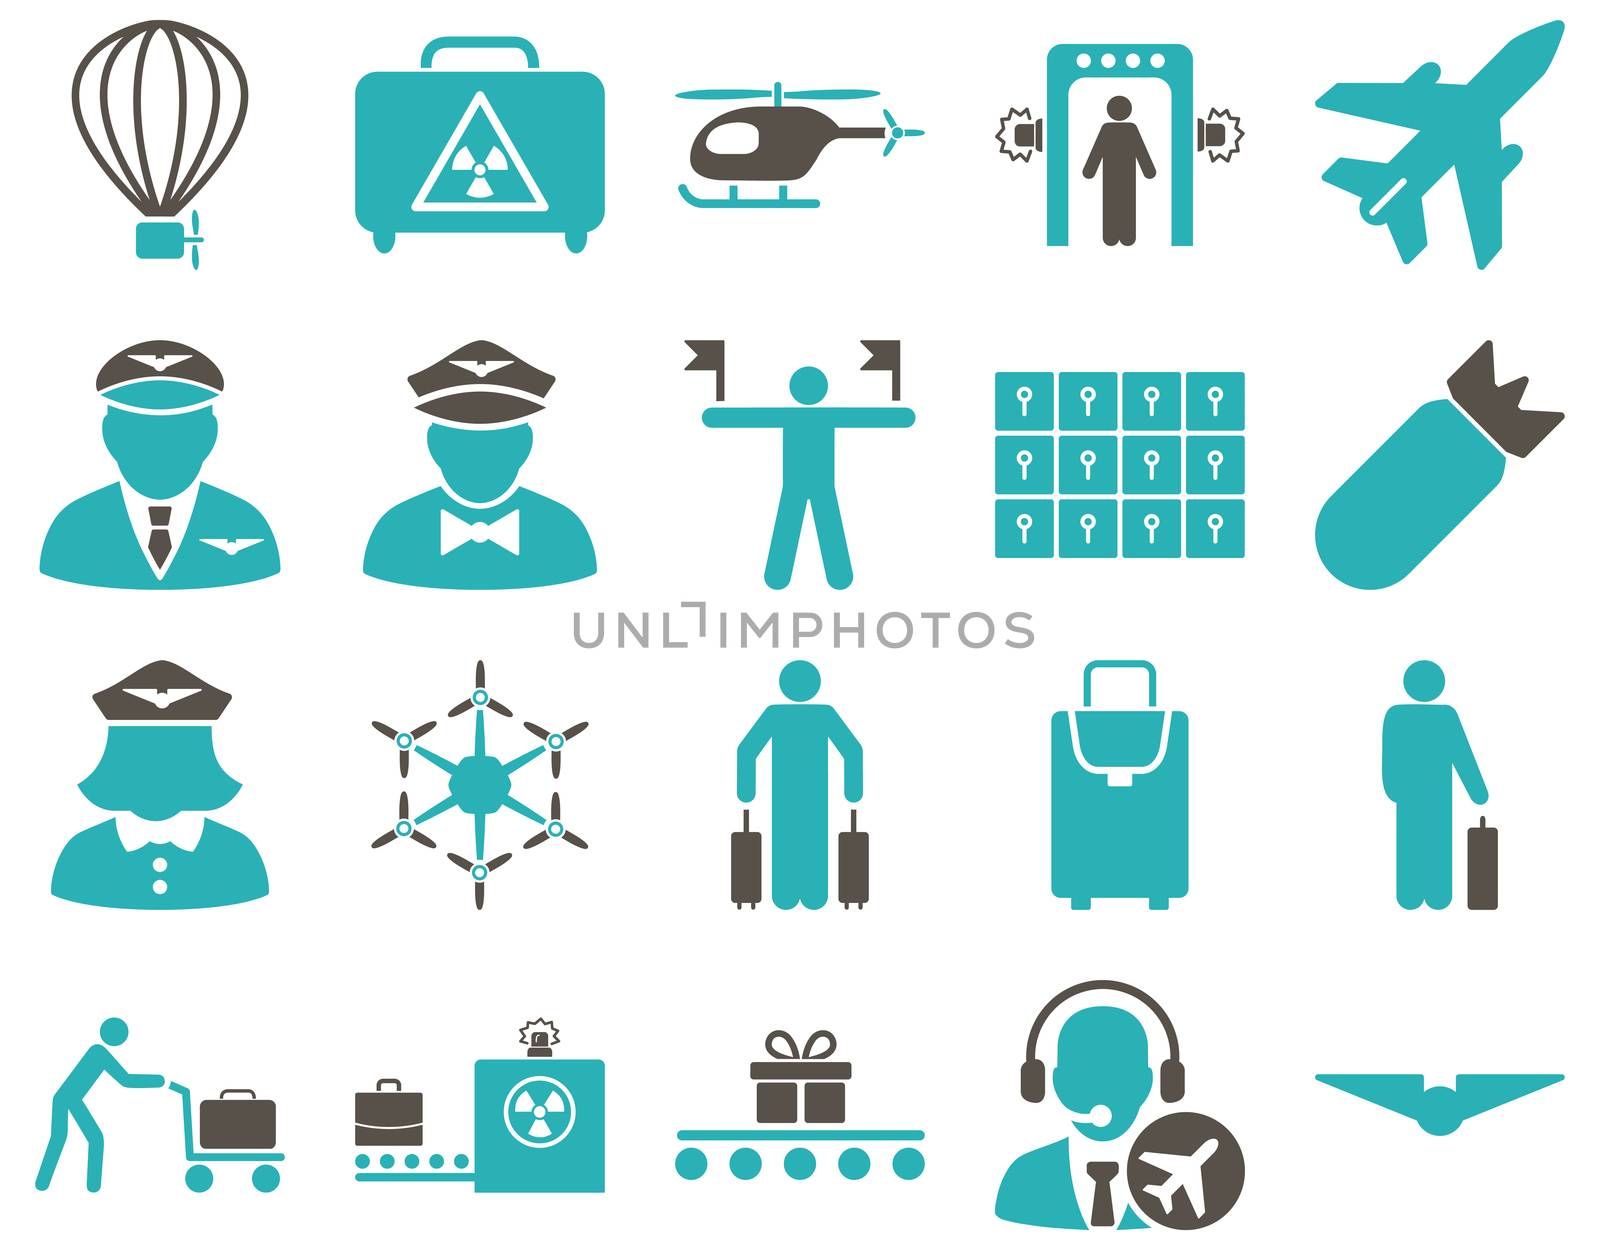 Airport Icon Set. These flat bicolor icons use grey and cyan colors. Raster images are isolated on a white background.